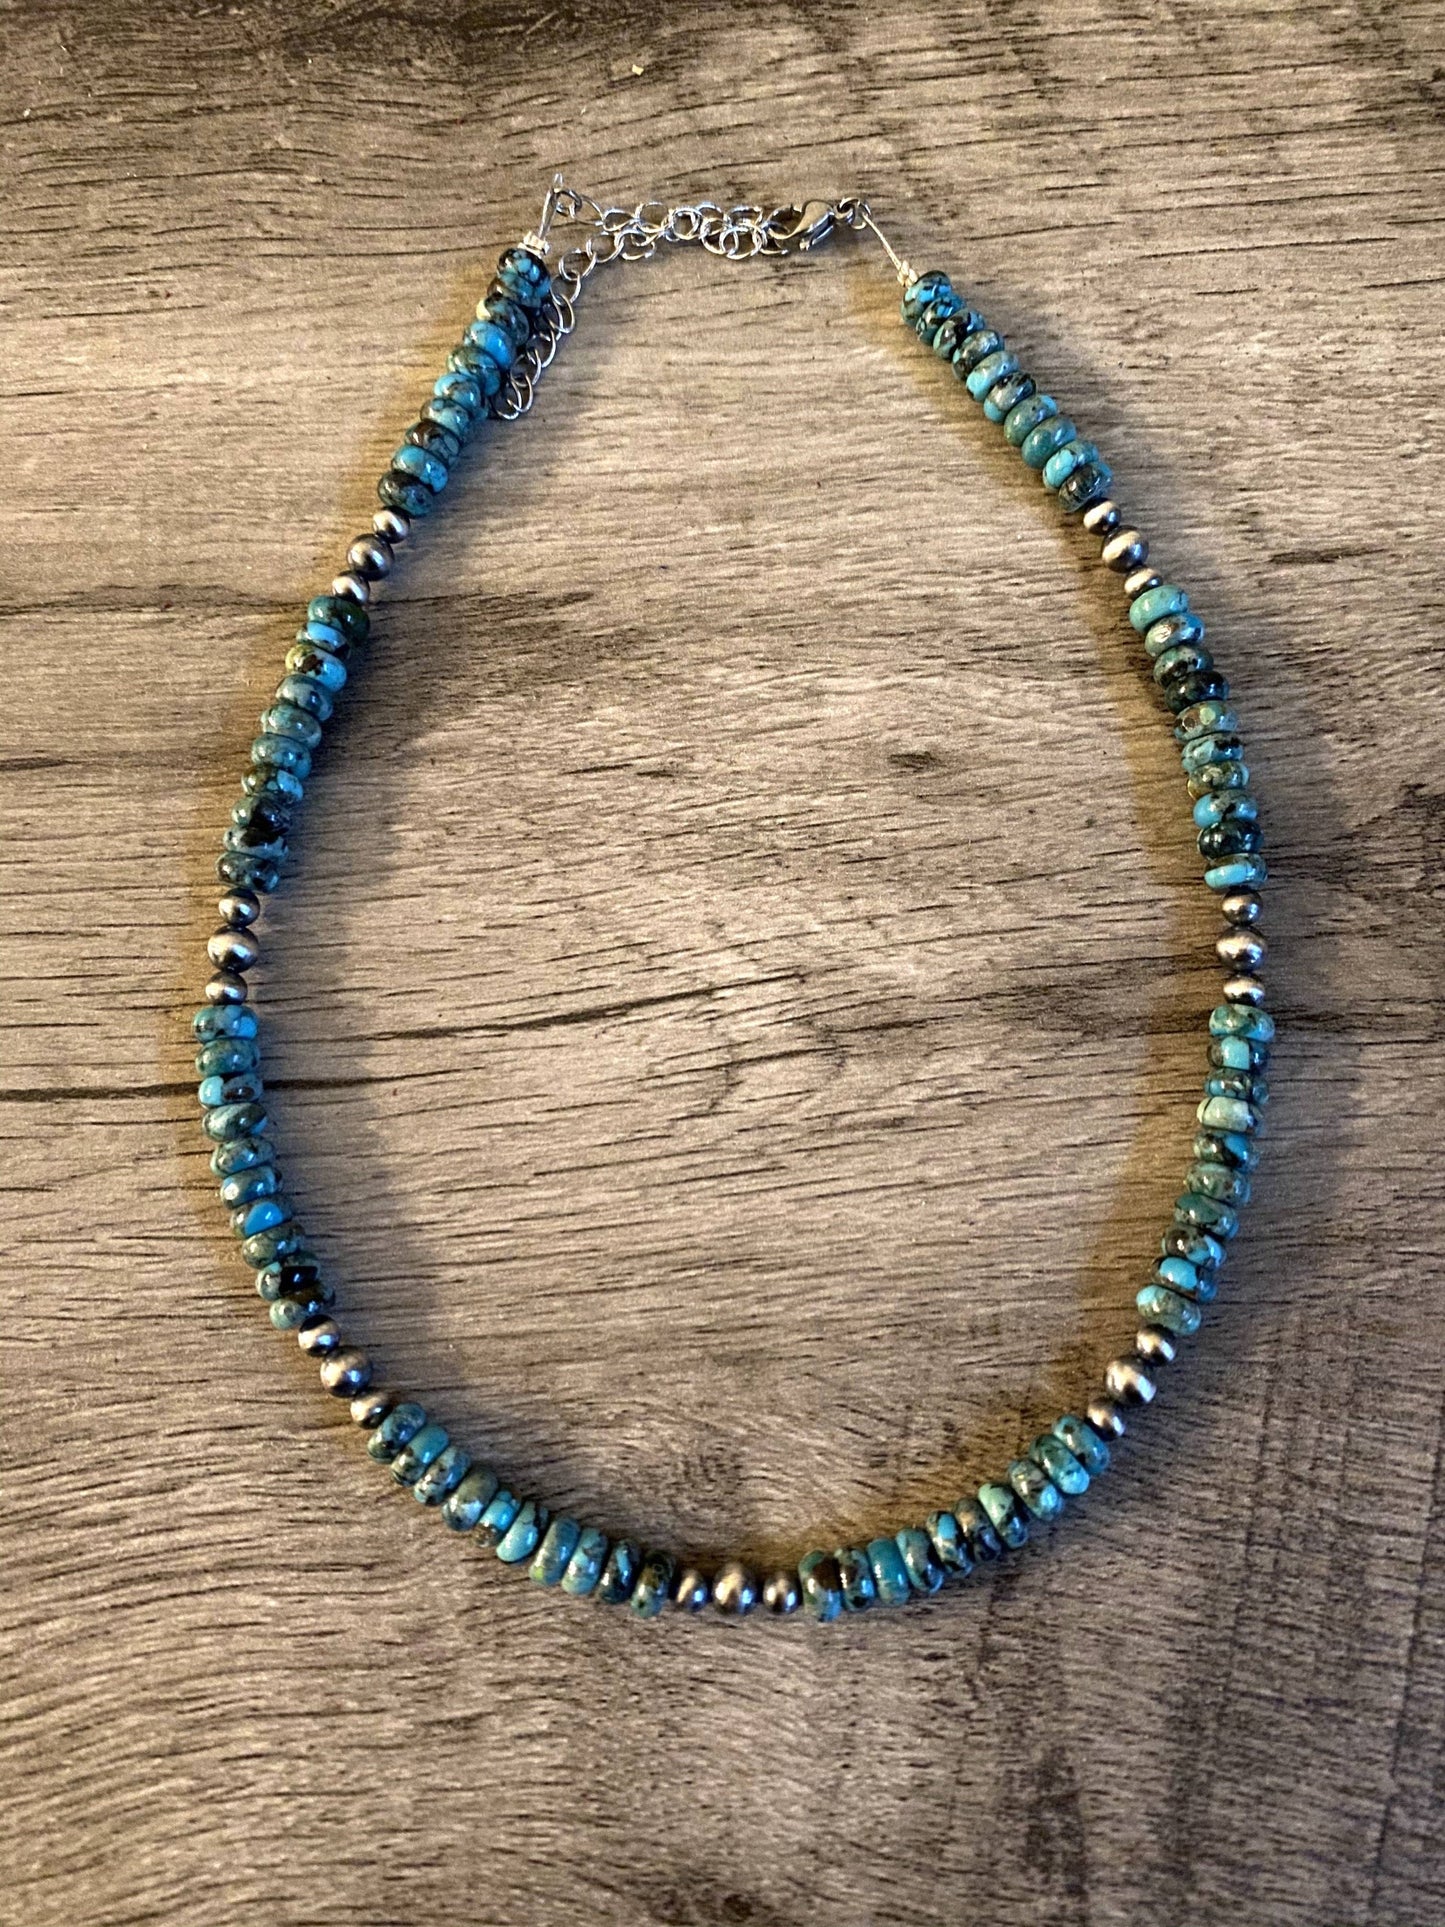 4 mm navajo pearl chokers necklace: A Little of Spiny